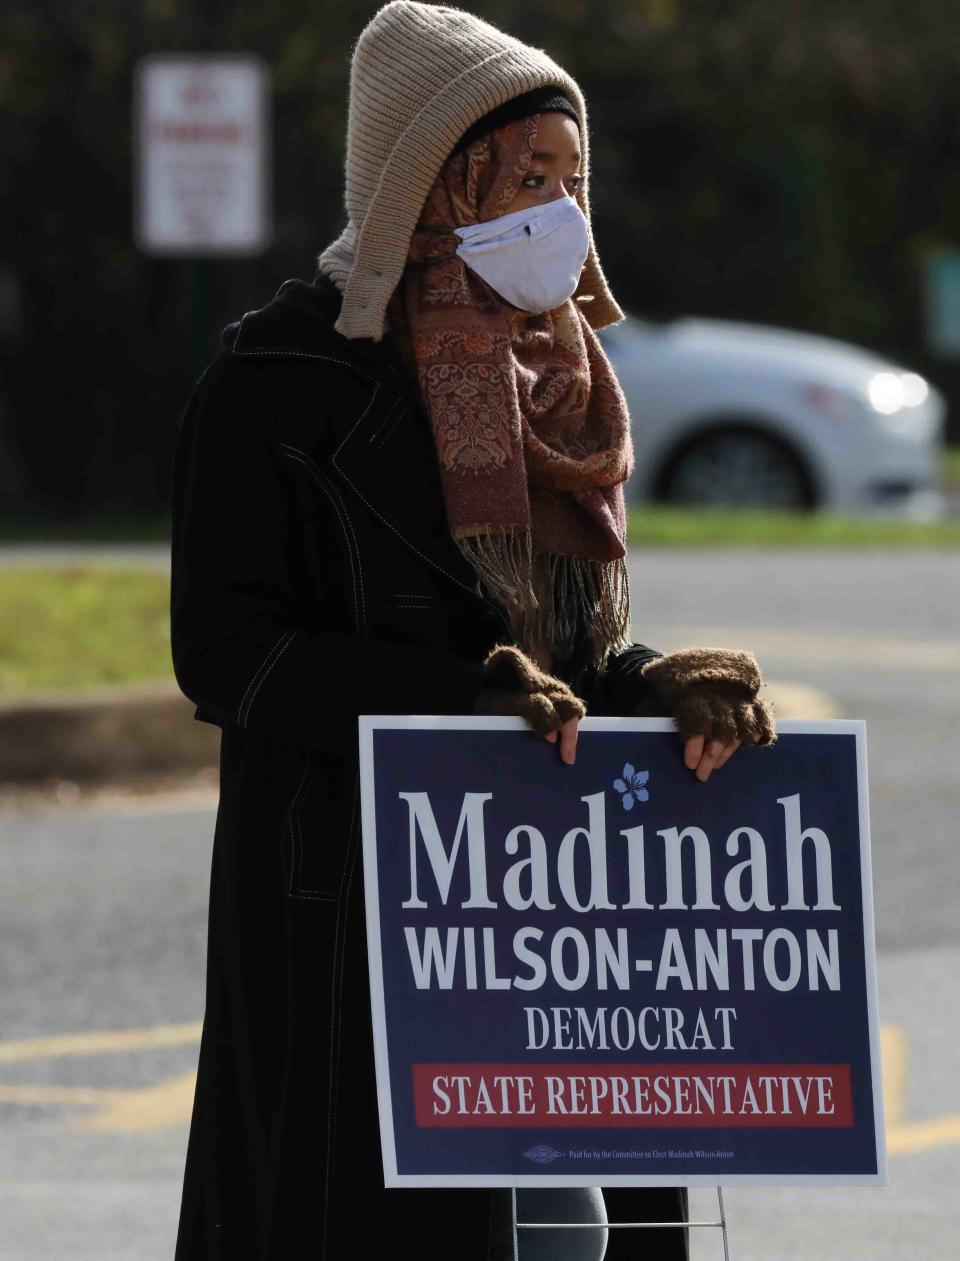 Madinah Wilson-Anton Candidate for a Member of Delaware House of Representatives greets members of the public on election day Tuesday, Nov. 03, 2020, at Thurgood Marshall elementary school in Newark, DE.